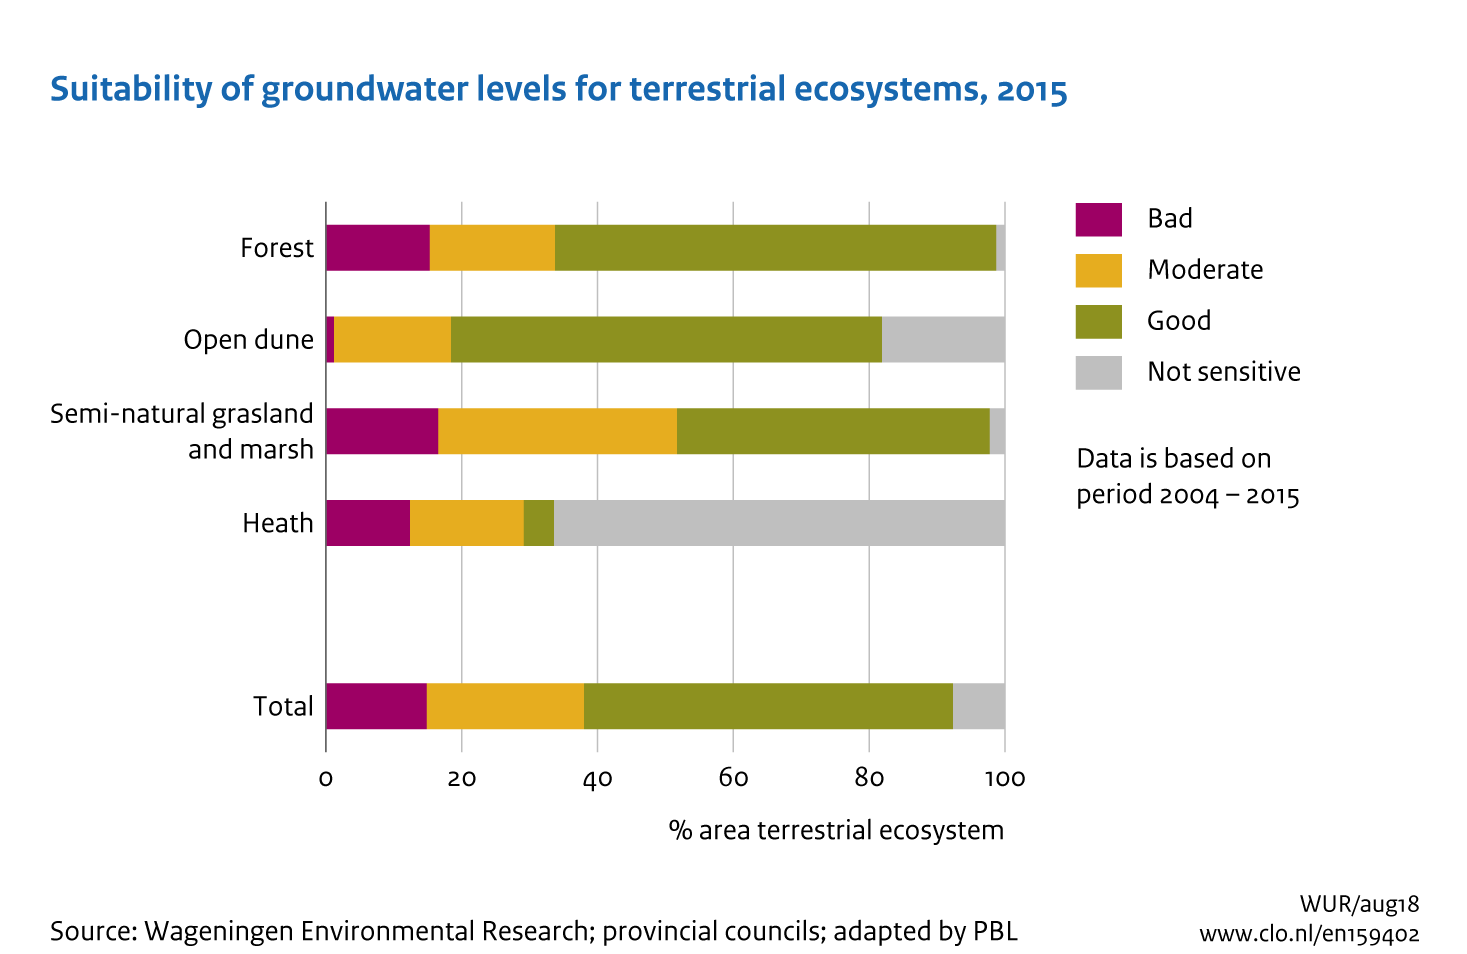 Image Suitability of groundwater levels for terrestrial ecosystems. The image is further explained in the text.